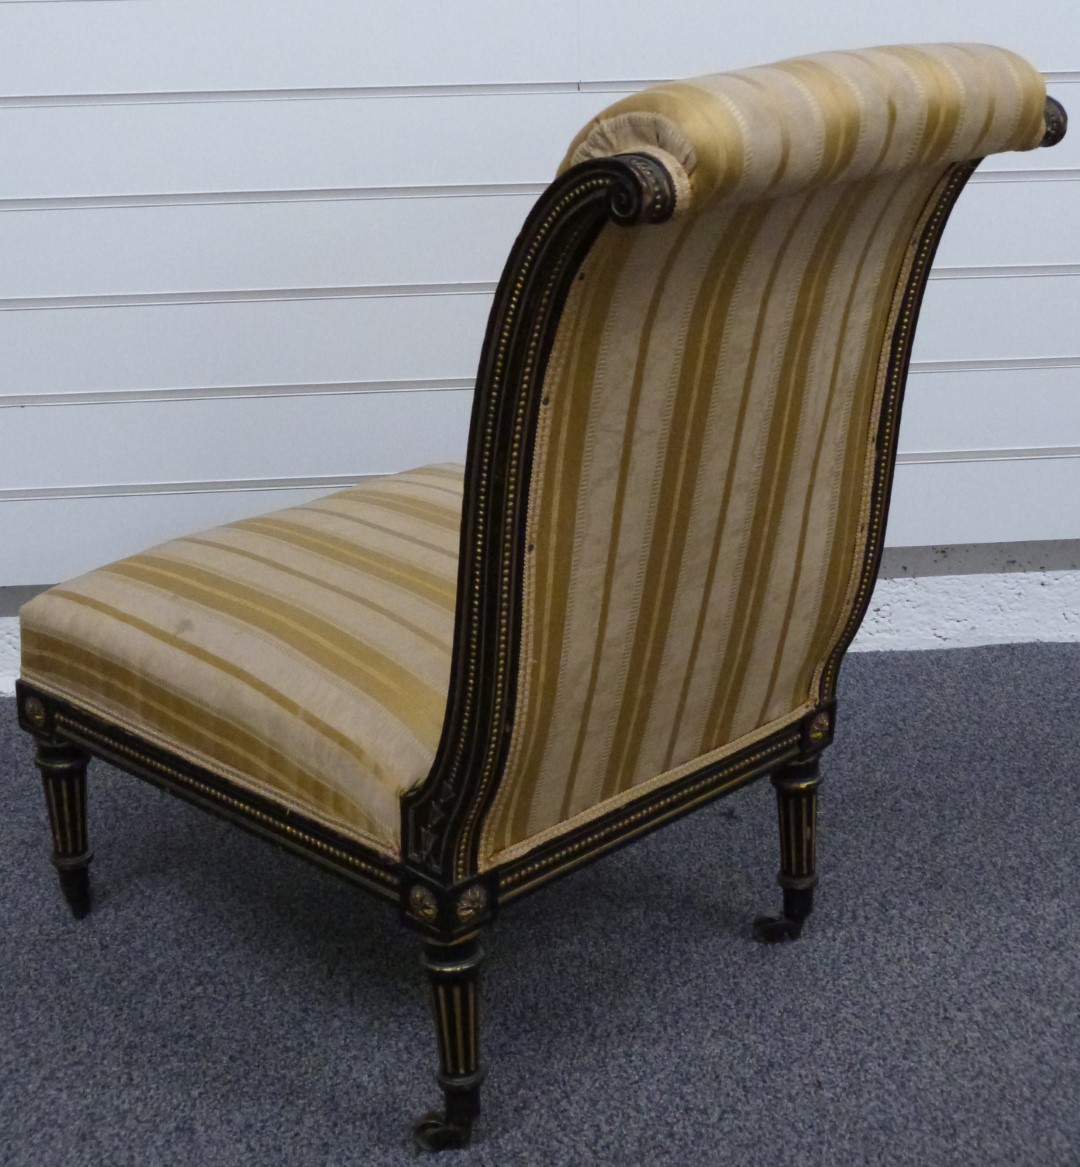 A 19thC upholstered nursing chair with ebonised and gilt decoration - Image 3 of 3